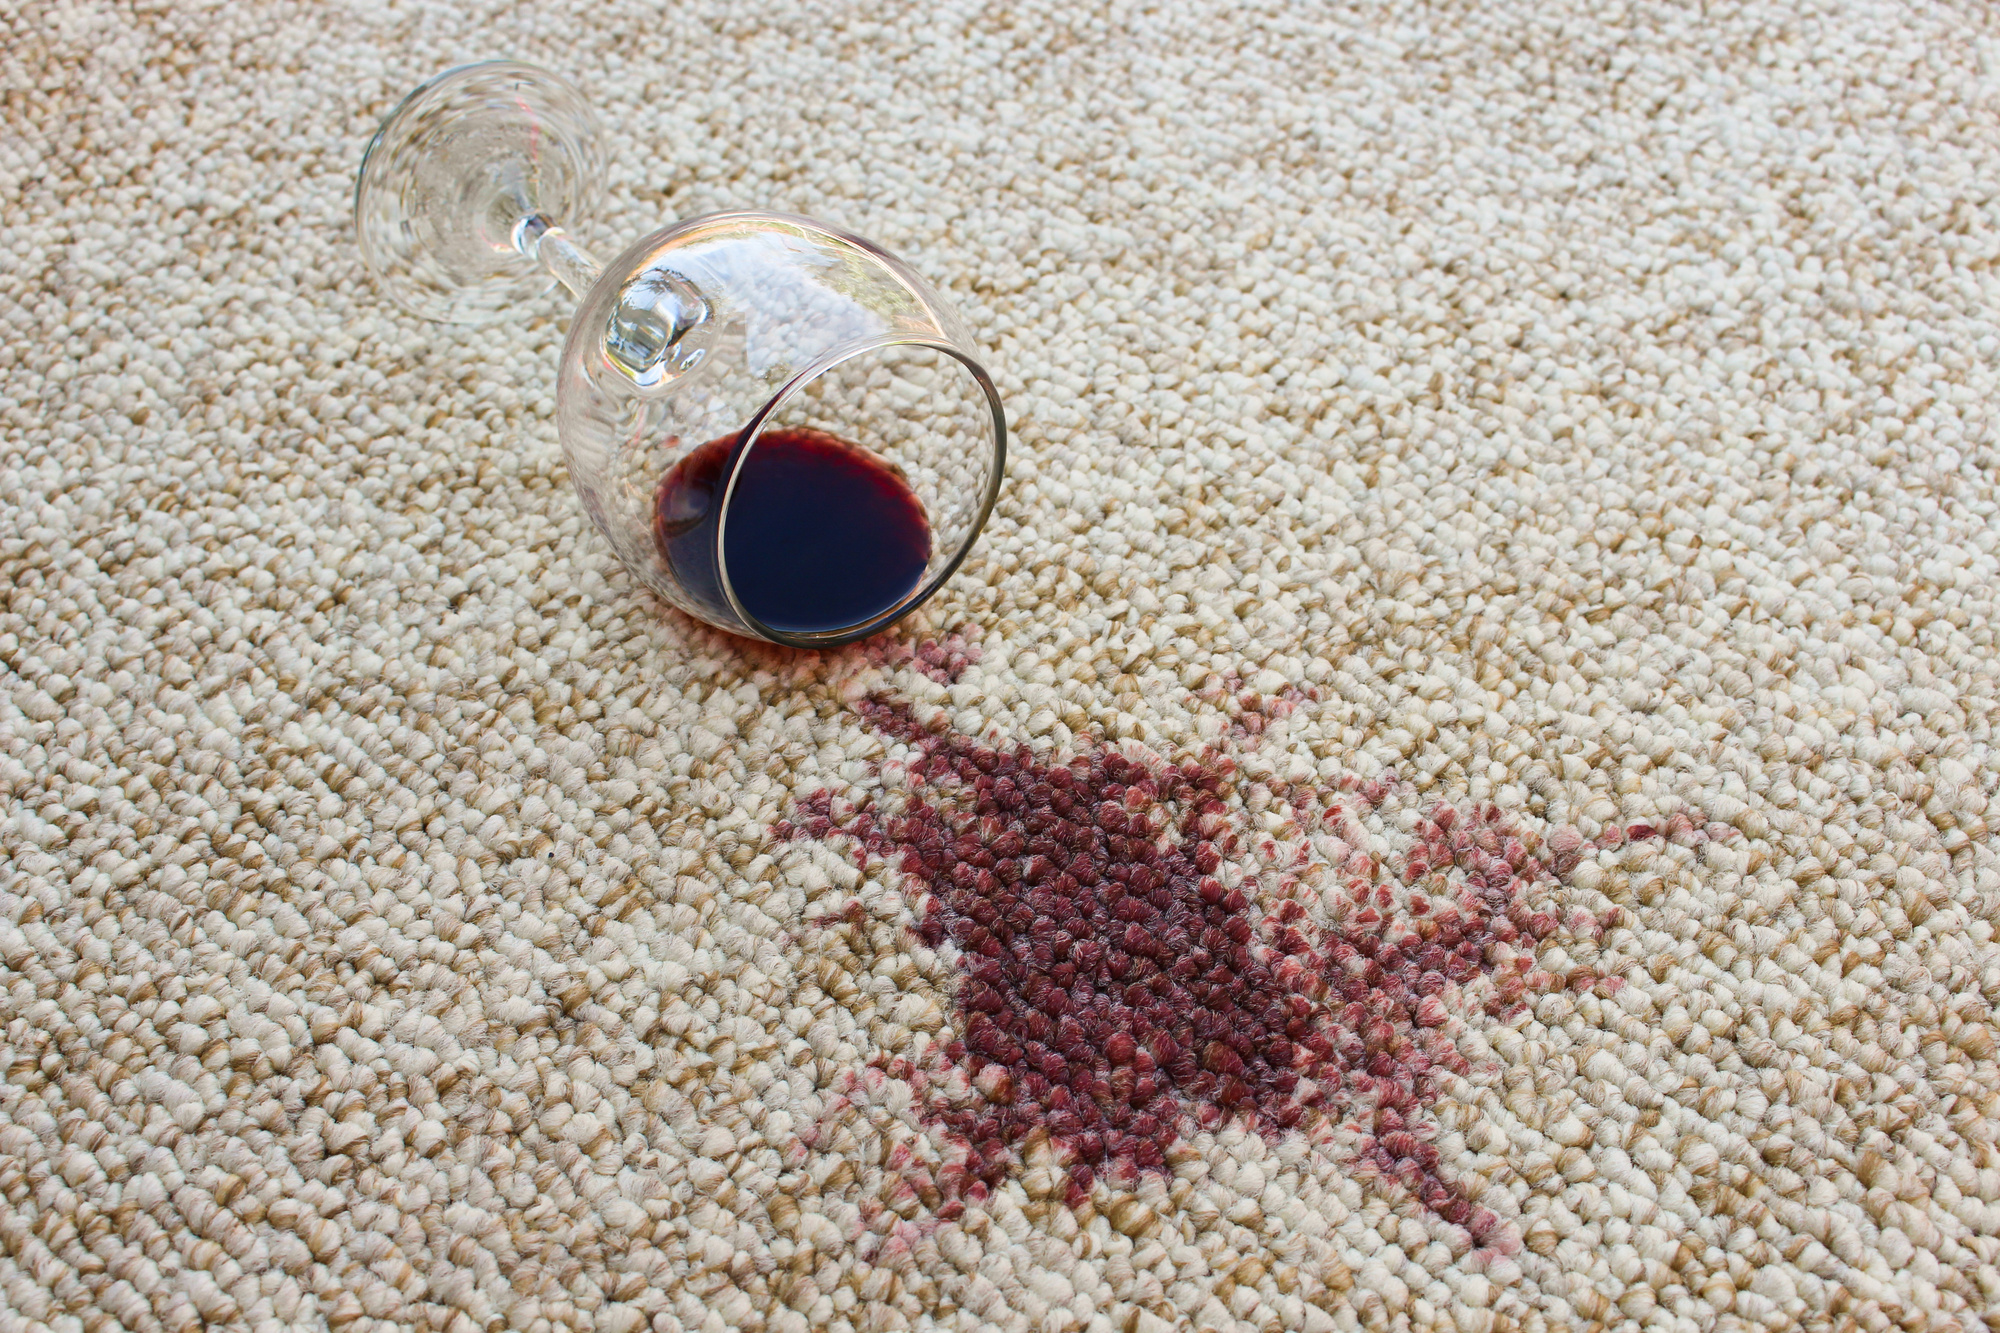 If you have stained carpets and rugs, there are a few steps you should take. This guide will teach you how to get rid of stains correctly.